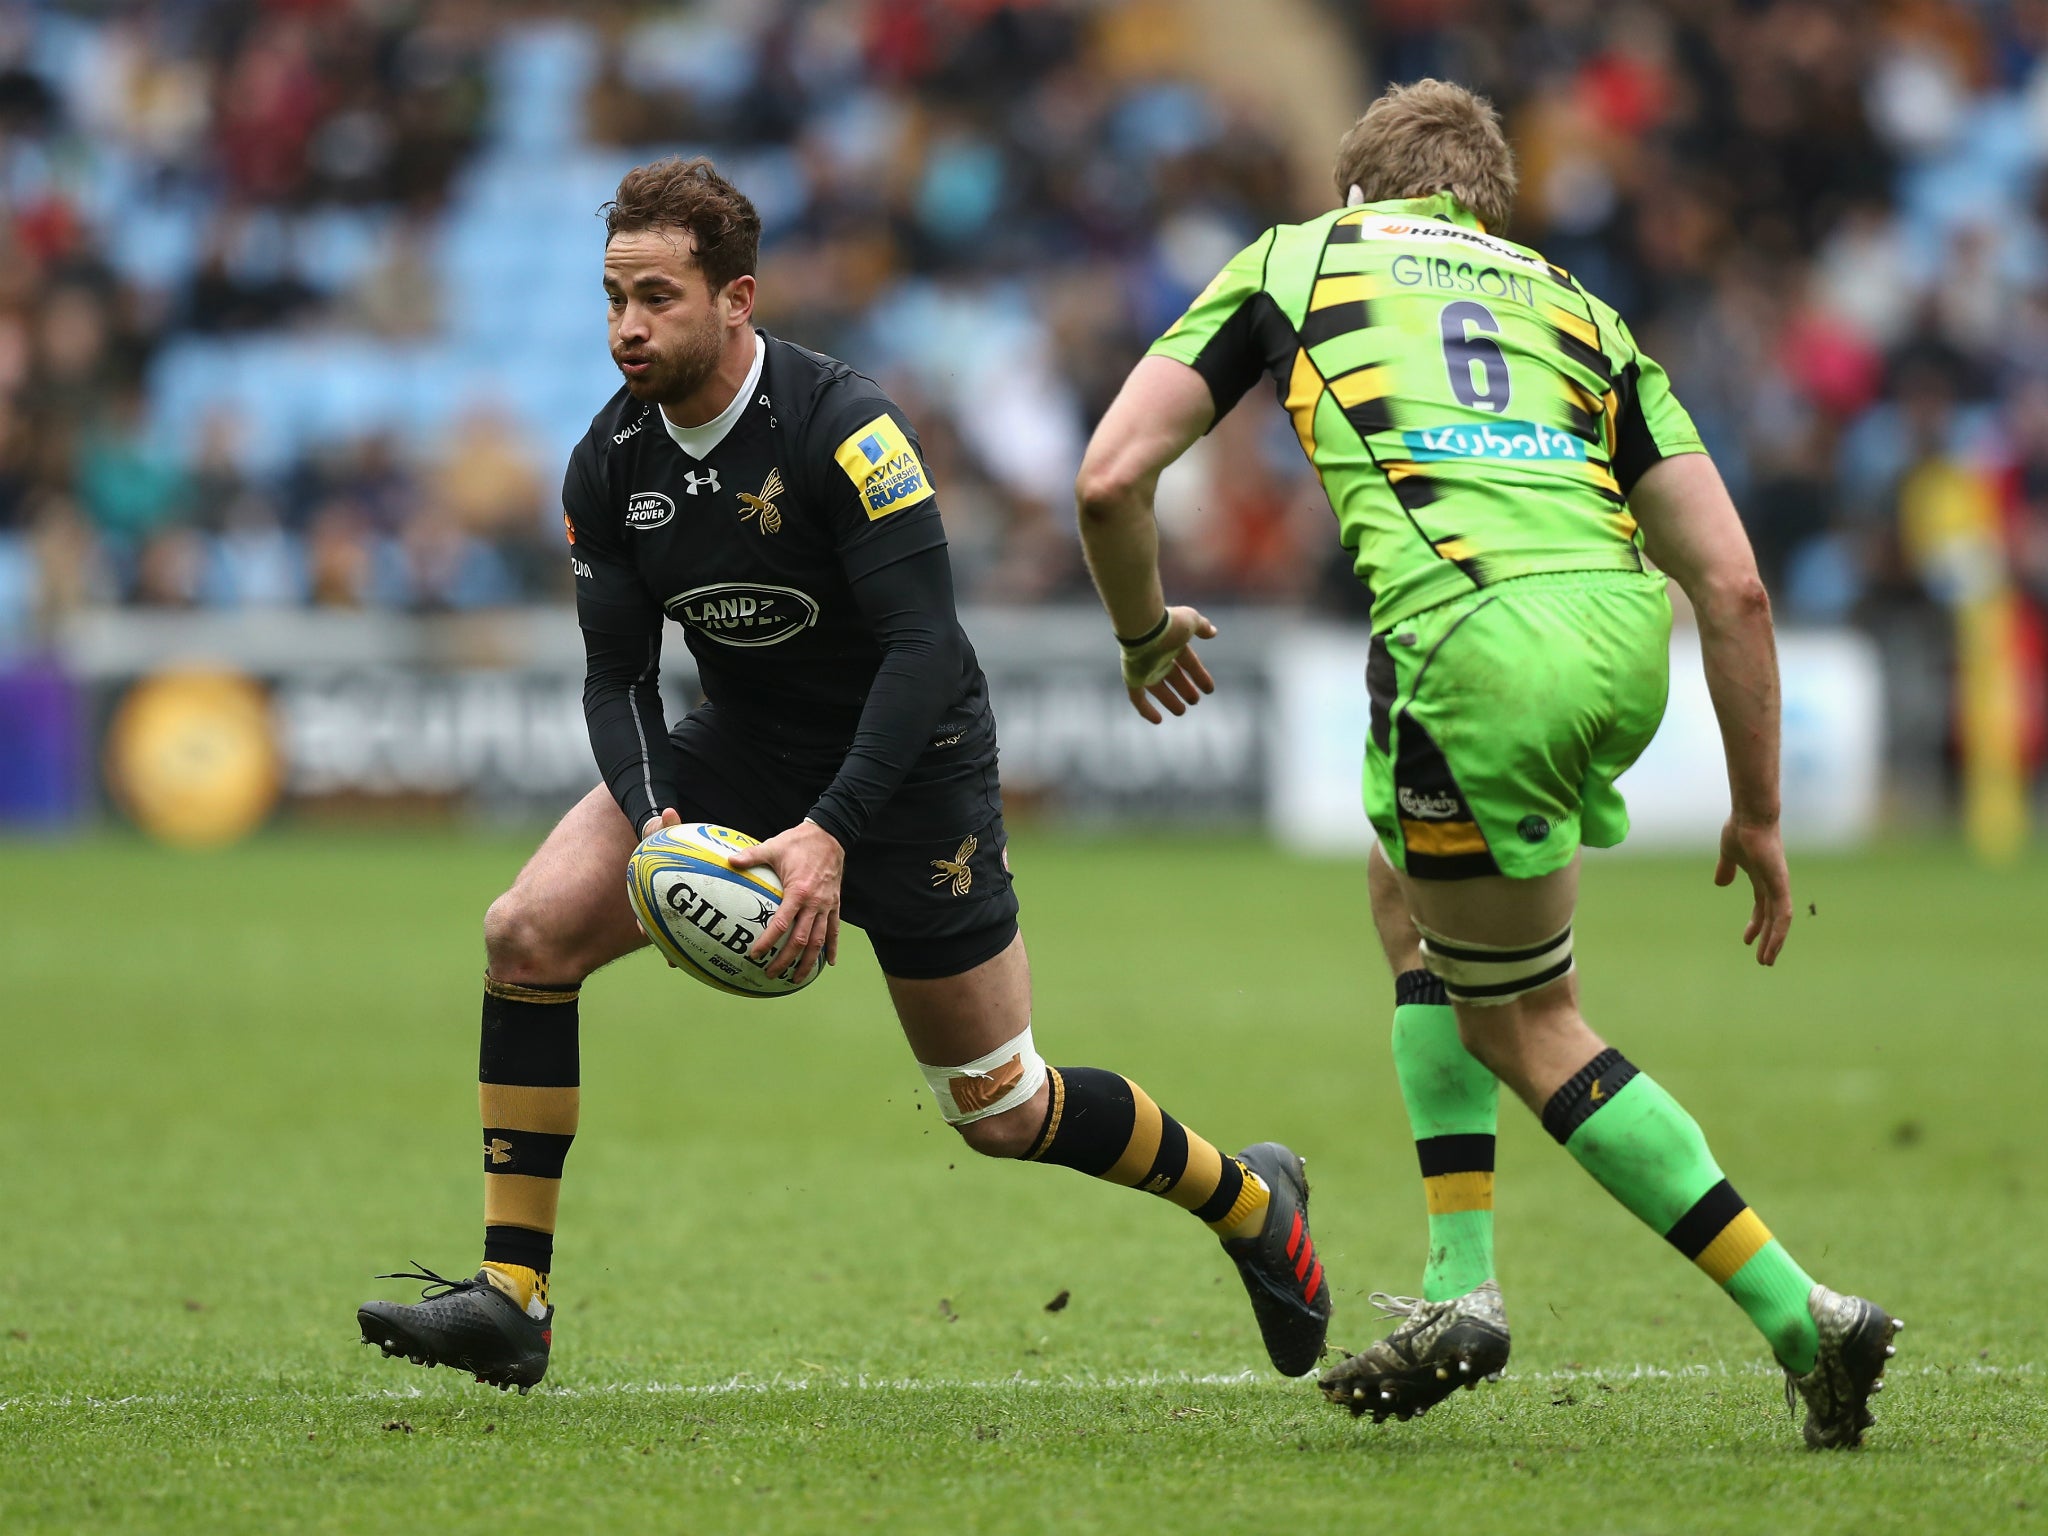 Cipriani will add valuable experience to Gloucester's young squad